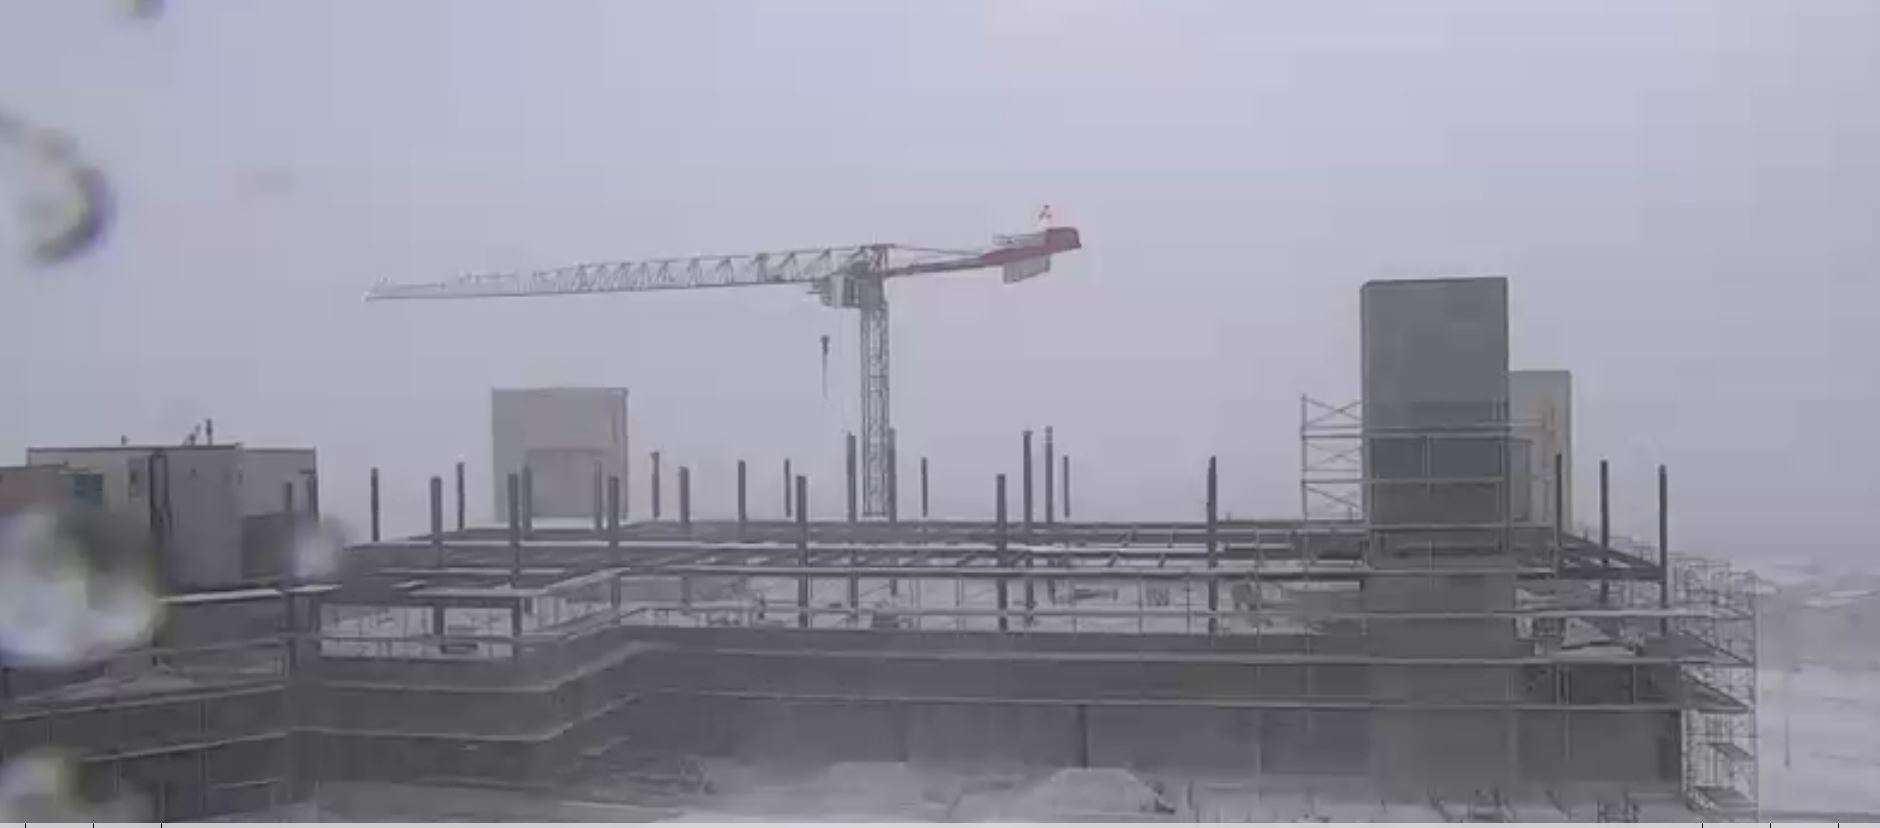 SNOW COVERED CONSTRUCTION PROJECT